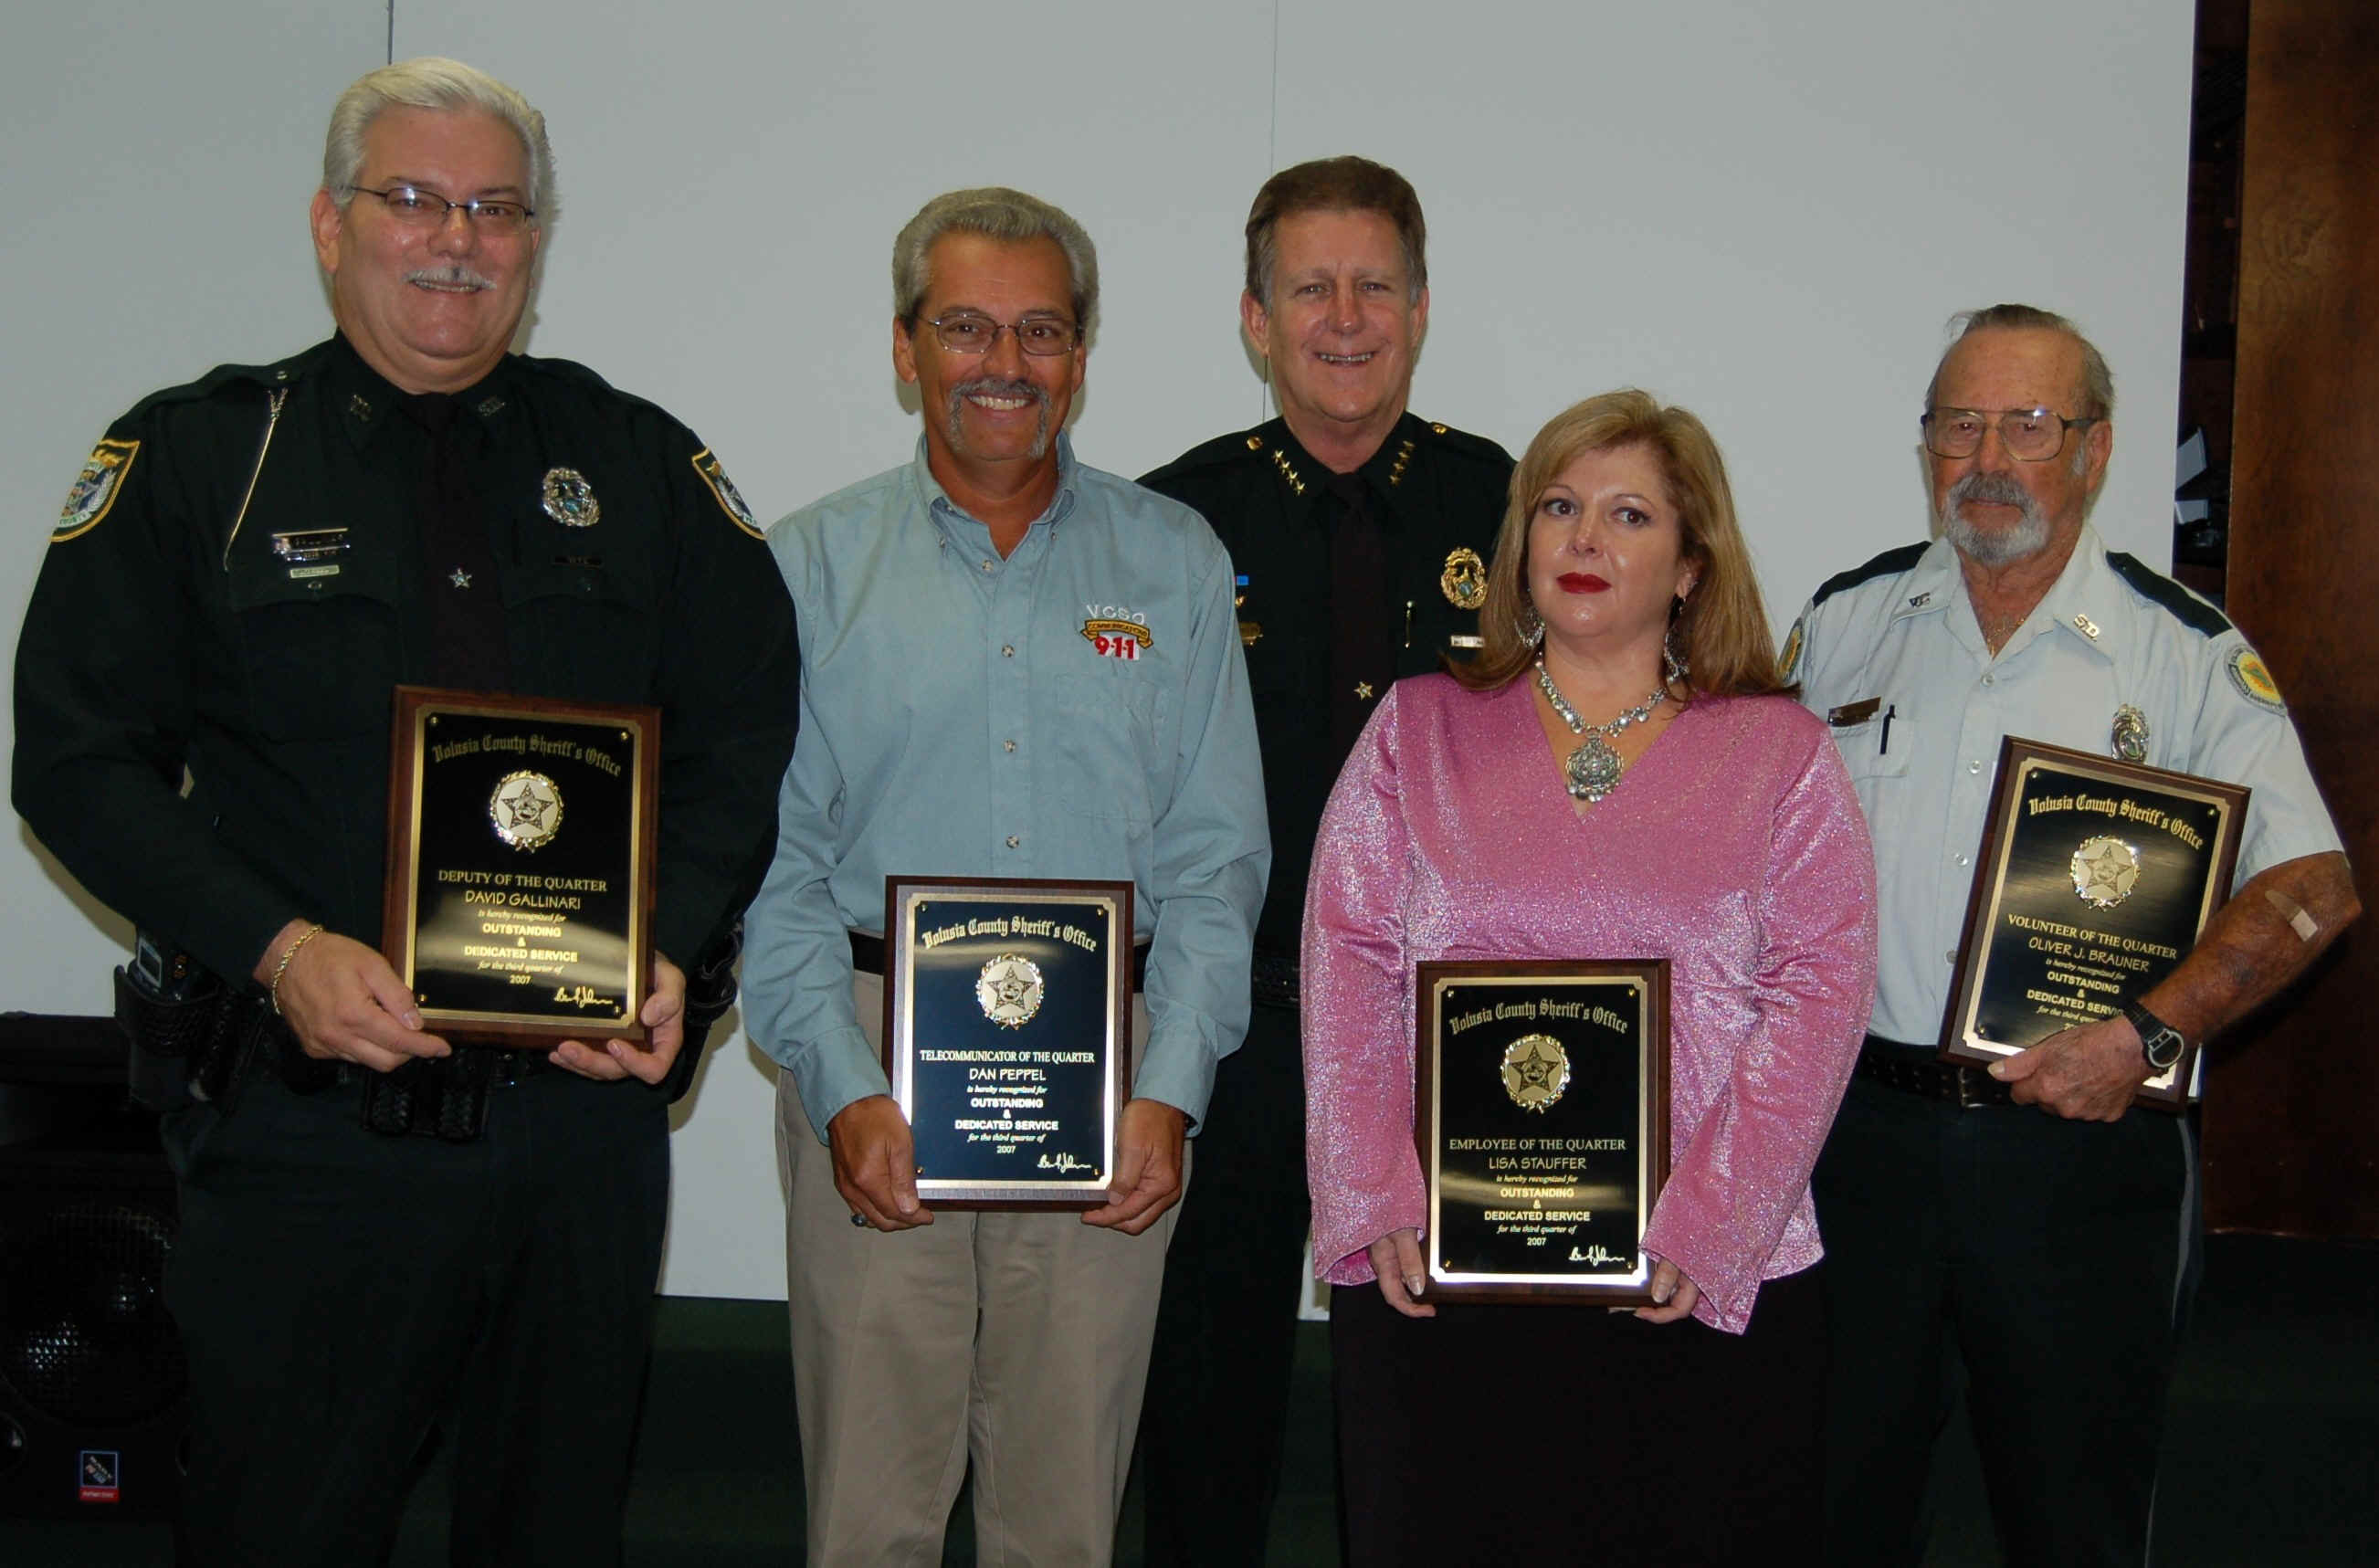 Sheriff's Office Honors Employees Of The Quarter Image